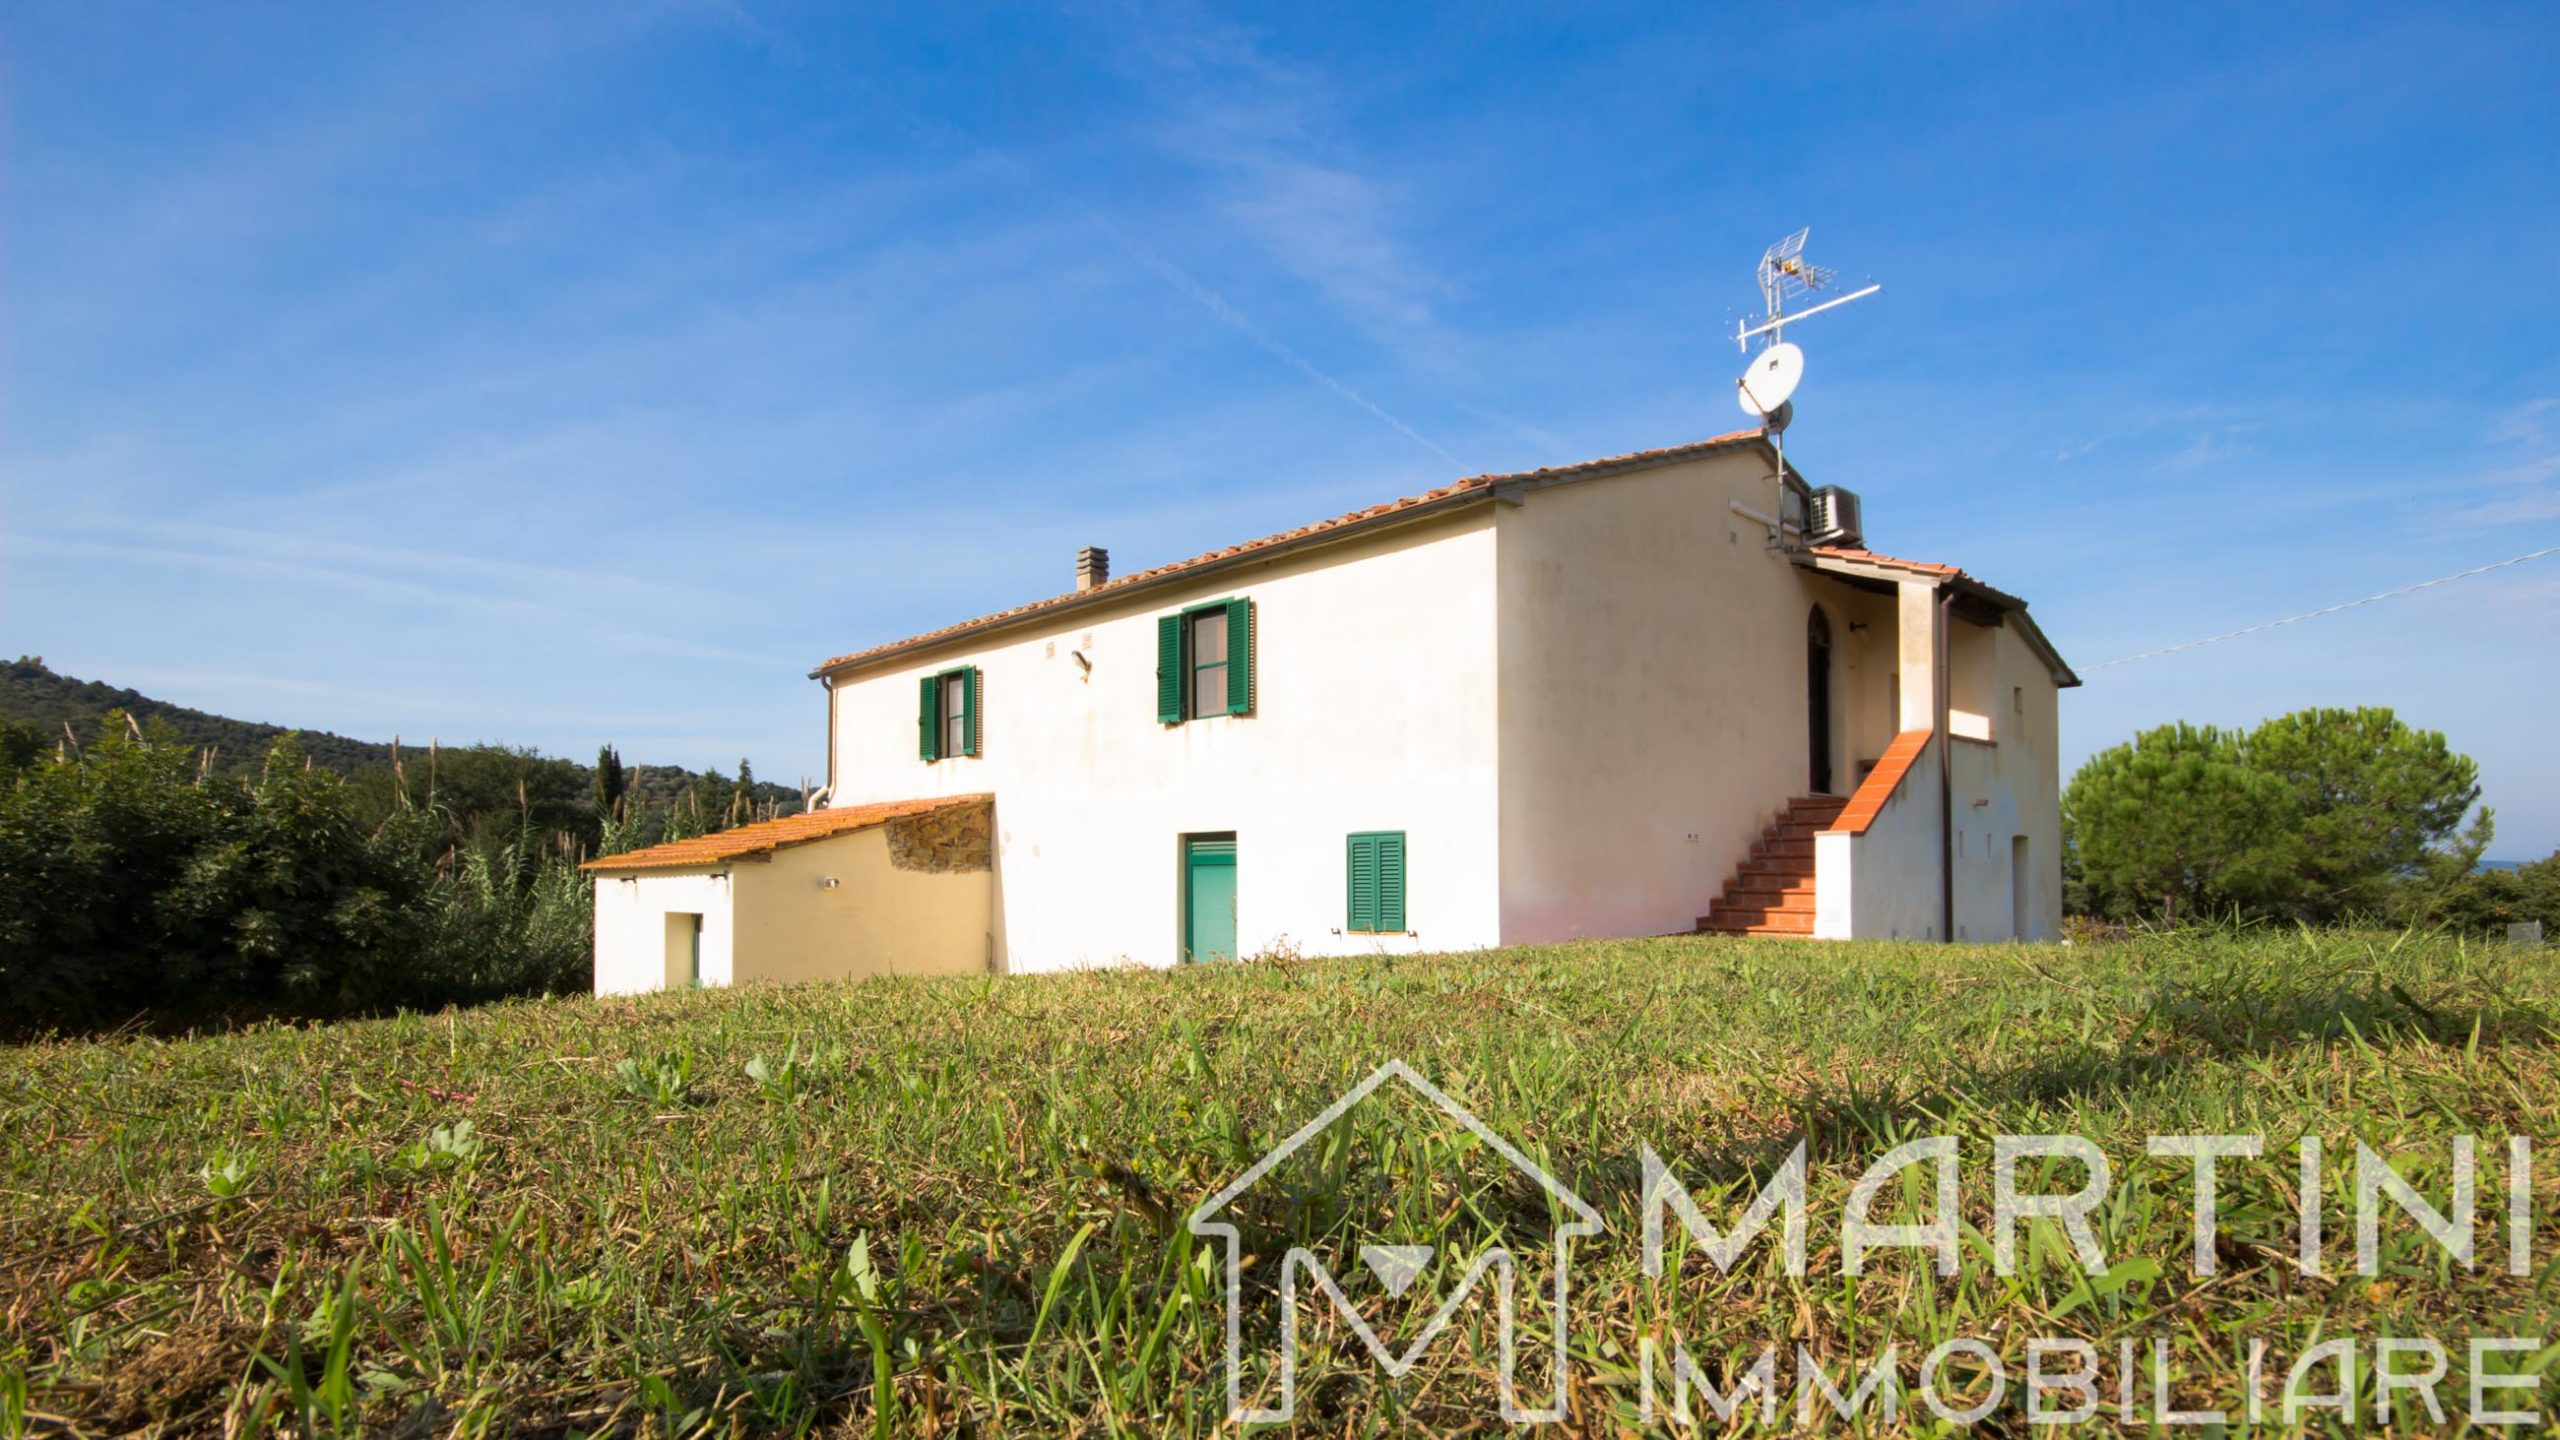 Country House to Rent with Garden | Tuscany Holiday